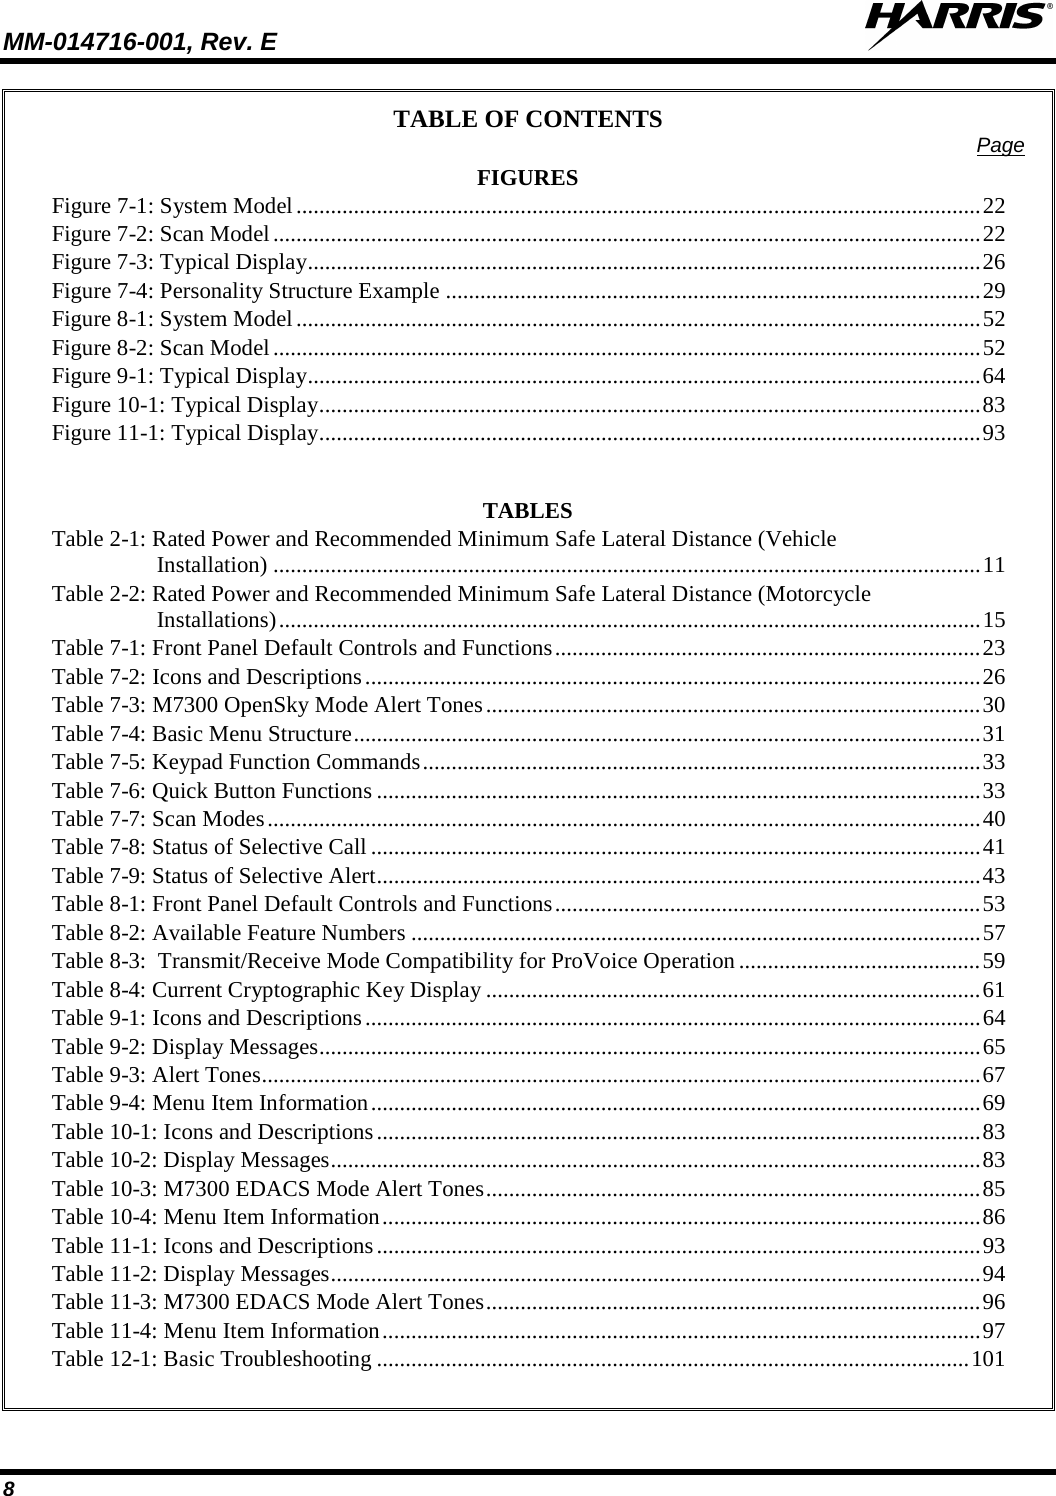 MM-014716-001, Rev. E  8 TABLE OF CONTENTS Page FIGURES Figure 7-1: System Model ....................................................................................................................... 22 Figure 7-2: Scan Model ........................................................................................................................... 22 Figure 7-3: Typical Display ..................................................................................................................... 26 Figure 7-4: Personality Structure Example ............................................................................................. 29 Figure 8-1: System Model ....................................................................................................................... 52 Figure 8-2: Scan Model ........................................................................................................................... 52 Figure 9-1: Typical Display ..................................................................................................................... 64 Figure 10-1: Typical Display ................................................................................................................... 83 Figure 11-1: Typical Display ................................................................................................................... 93   TABLES Table 2-1: Rated Power and Recommended Minimum Safe Lateral Distance (Vehicle Installation) ........................................................................................................................... 11 Table 2-2: Rated Power and Recommended Minimum Safe Lateral Distance (Motorcycle Installations) .......................................................................................................................... 15 Table 7-1: Front Panel Default Controls and Functions .......................................................................... 23 Table 7-2: Icons and Descriptions ........................................................................................................... 26 Table 7-3: M7300 OpenSky Mode Alert Tones ...................................................................................... 30 Table 7-4: Basic Menu Structure ............................................................................................................. 31 Table 7-5: Keypad Function Commands ................................................................................................. 33 Table 7-6: Quick Button Functions ......................................................................................................... 33 Table 7-7: Scan Modes ............................................................................................................................ 40 Table 7-8: Status of Selective Call .......................................................................................................... 41 Table 7-9: Status of Selective Alert ......................................................................................................... 43 Table 8-1: Front Panel Default Controls and Functions .......................................................................... 53 Table 8-2: Available Feature Numbers ................................................................................................... 57 Table 8-3:  Transmit/Receive Mode Compatibility for ProVoice Operation .......................................... 59 Table 8-4: Current Cryptographic Key Display ...................................................................................... 61 Table 9-1: Icons and Descriptions ........................................................................................................... 64 Table 9-2: Display Messages ................................................................................................................... 65 Table 9-3: Alert Tones ............................................................................................................................. 67 Table 9-4: Menu Item Information .......................................................................................................... 69 Table 10-1: Icons and Descriptions ......................................................................................................... 83 Table 10-2: Display Messages ................................................................................................................. 83 Table 10-3: M7300 EDACS Mode Alert Tones ...................................................................................... 85 Table 10-4: Menu Item Information ........................................................................................................ 86 Table 11-1: Icons and Descriptions ......................................................................................................... 93 Table 11-2: Display Messages ................................................................................................................. 94 Table 11-3: M7300 EDACS Mode Alert Tones ...................................................................................... 96 Table 11-4: Menu Item Information ........................................................................................................ 97 Table 12-1: Basic Troubleshooting ....................................................................................................... 101  